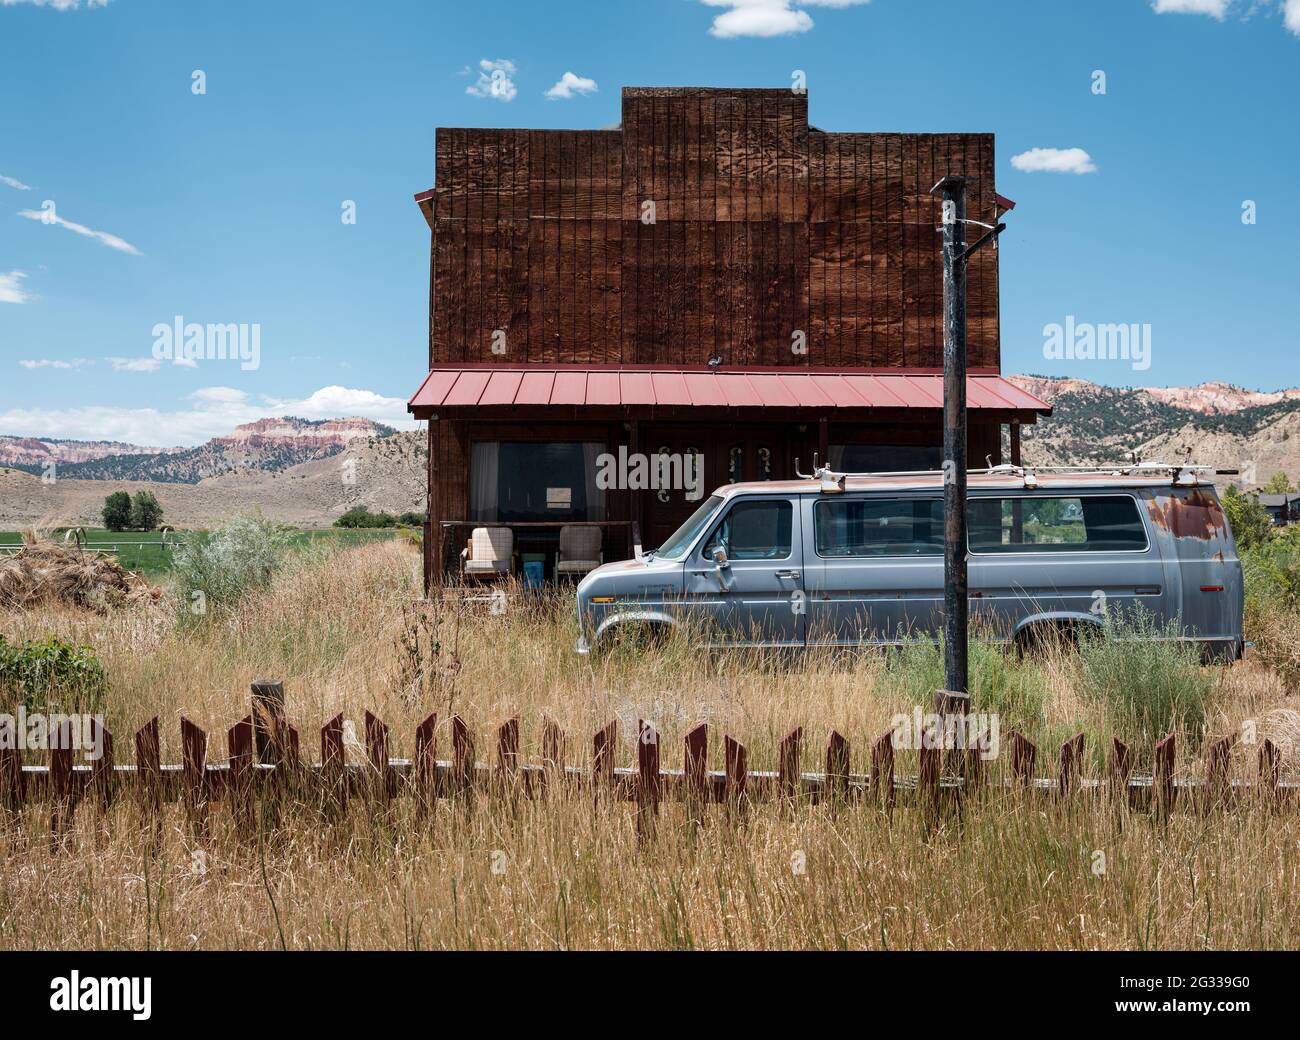 TROPIC, UTAH - CIRCA AUGUST 2020: Abandoned building and van in Tropic, a town in the outskirts of the Bryce Canyon National Park, Utah. Stock Photo